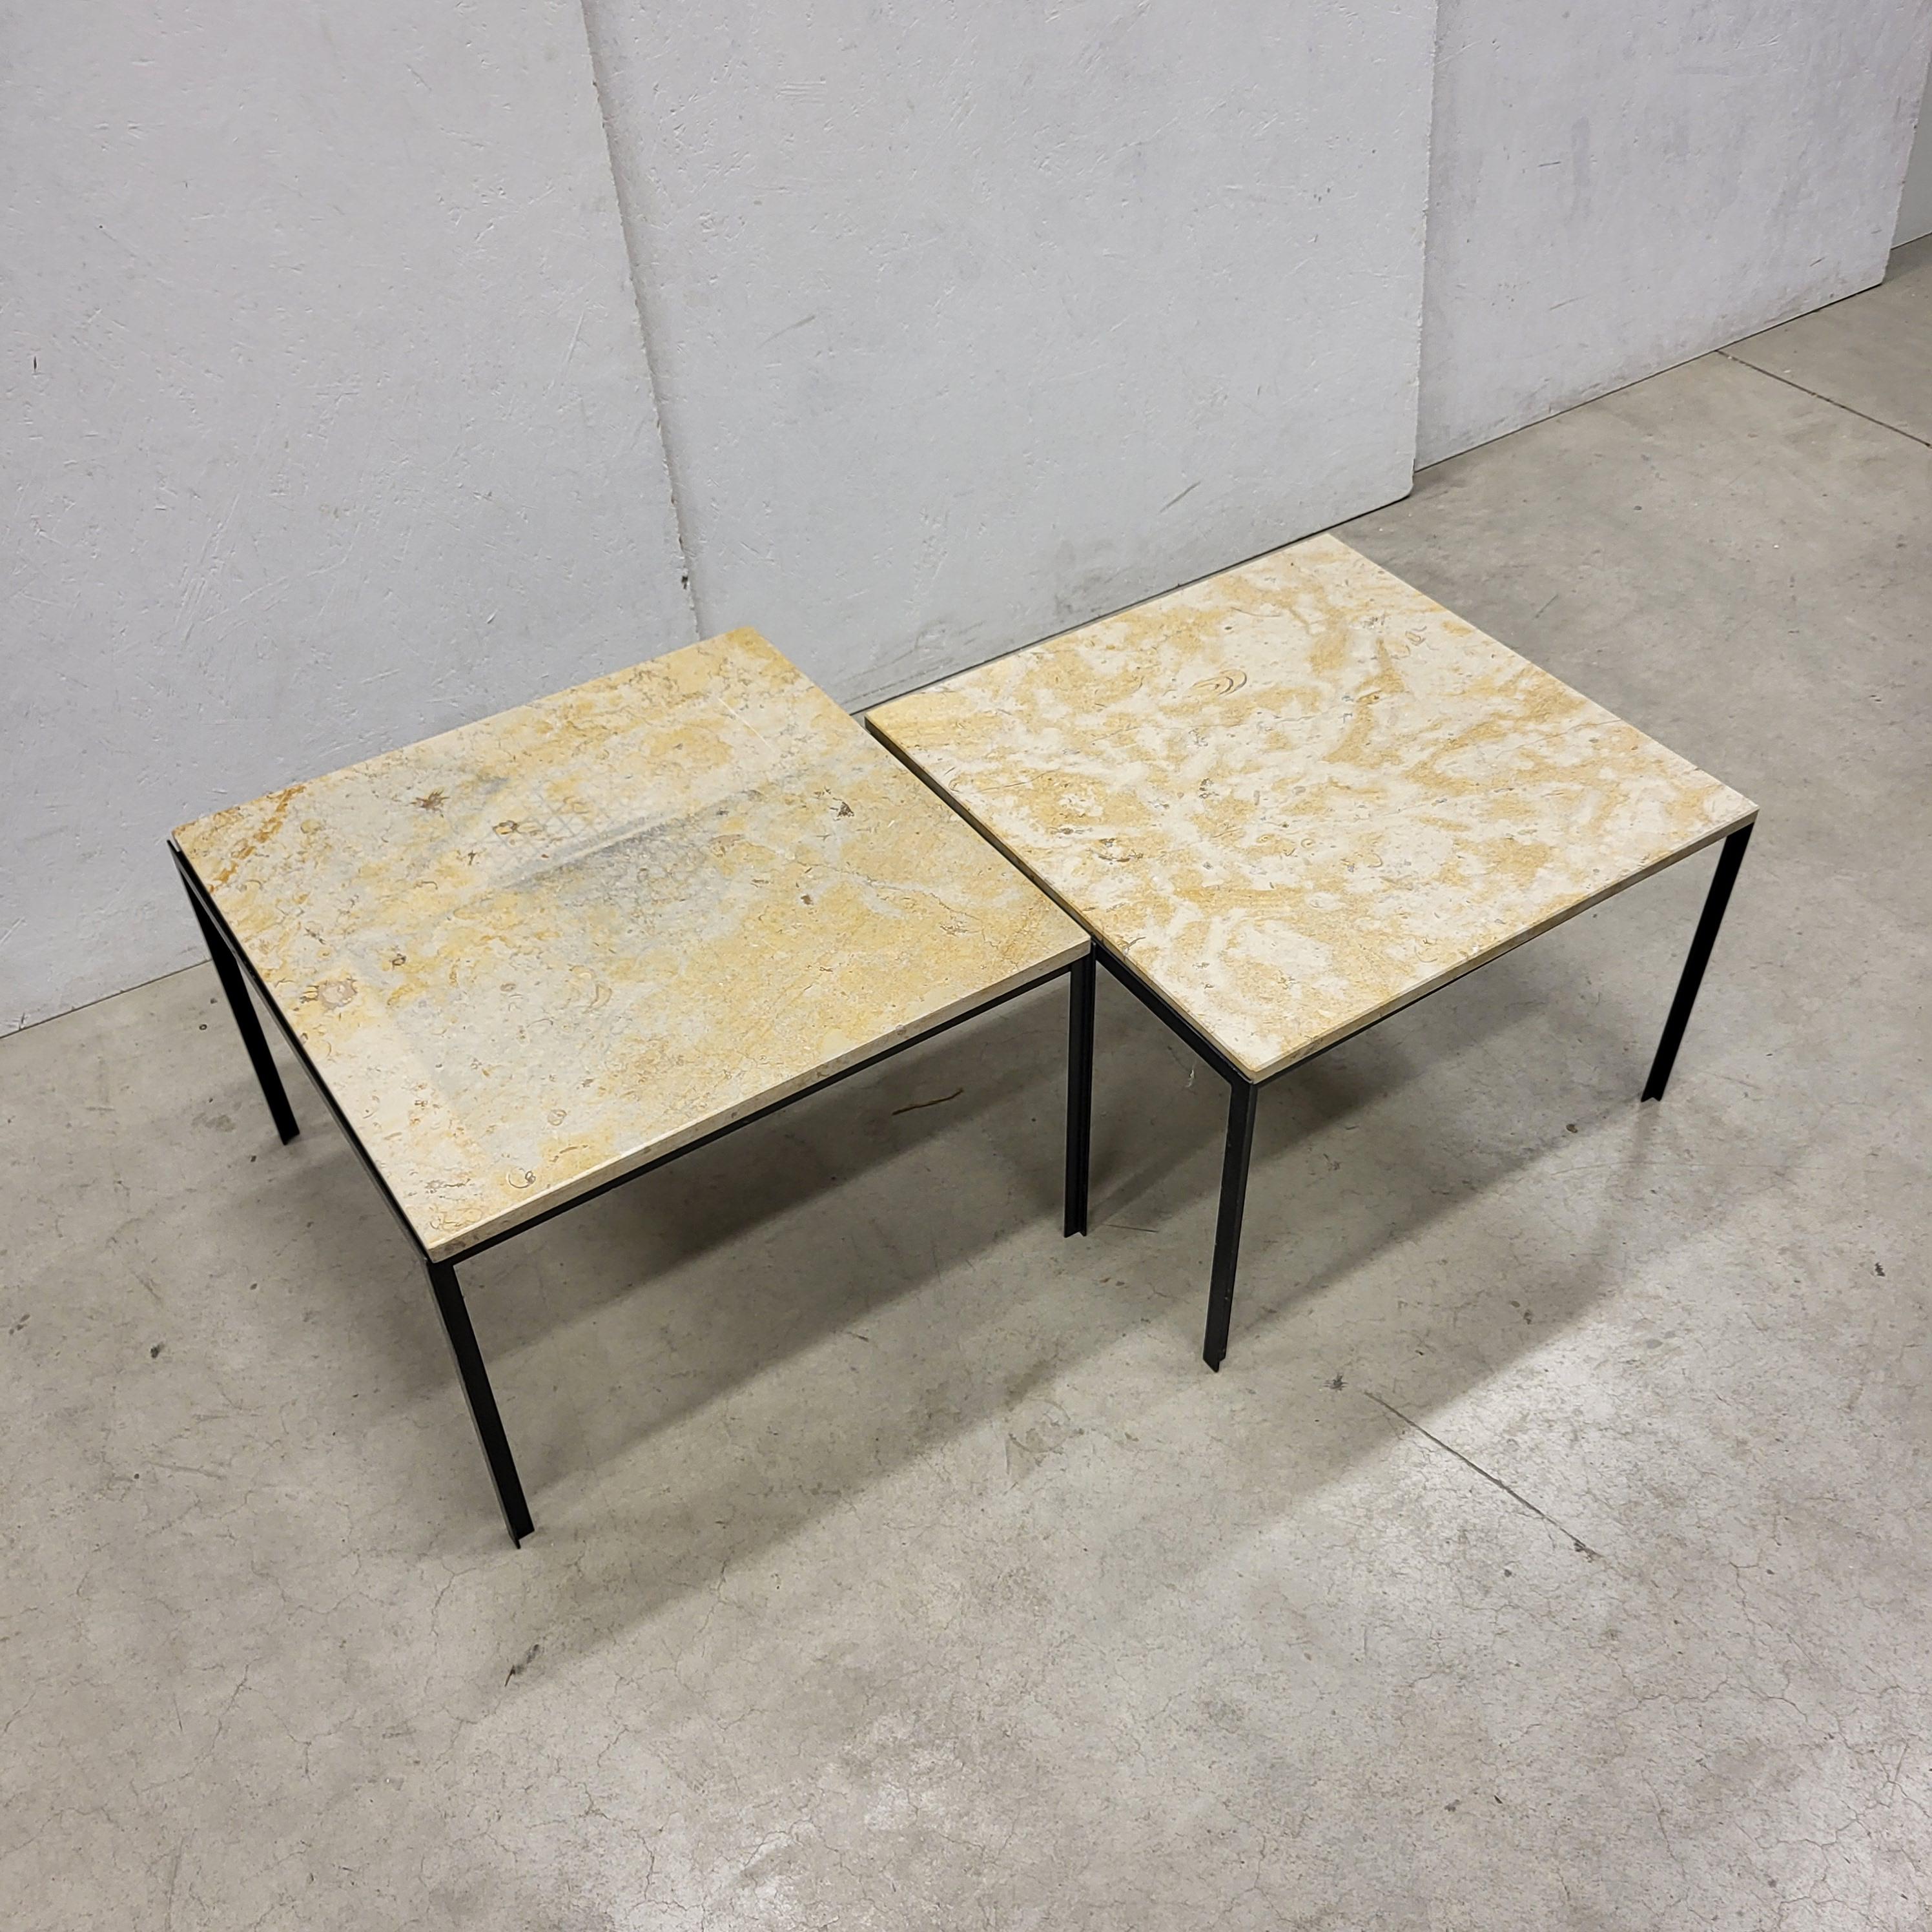 American Florence Knoll T Angle Travertin Table by Knoll 1960s Set of 2